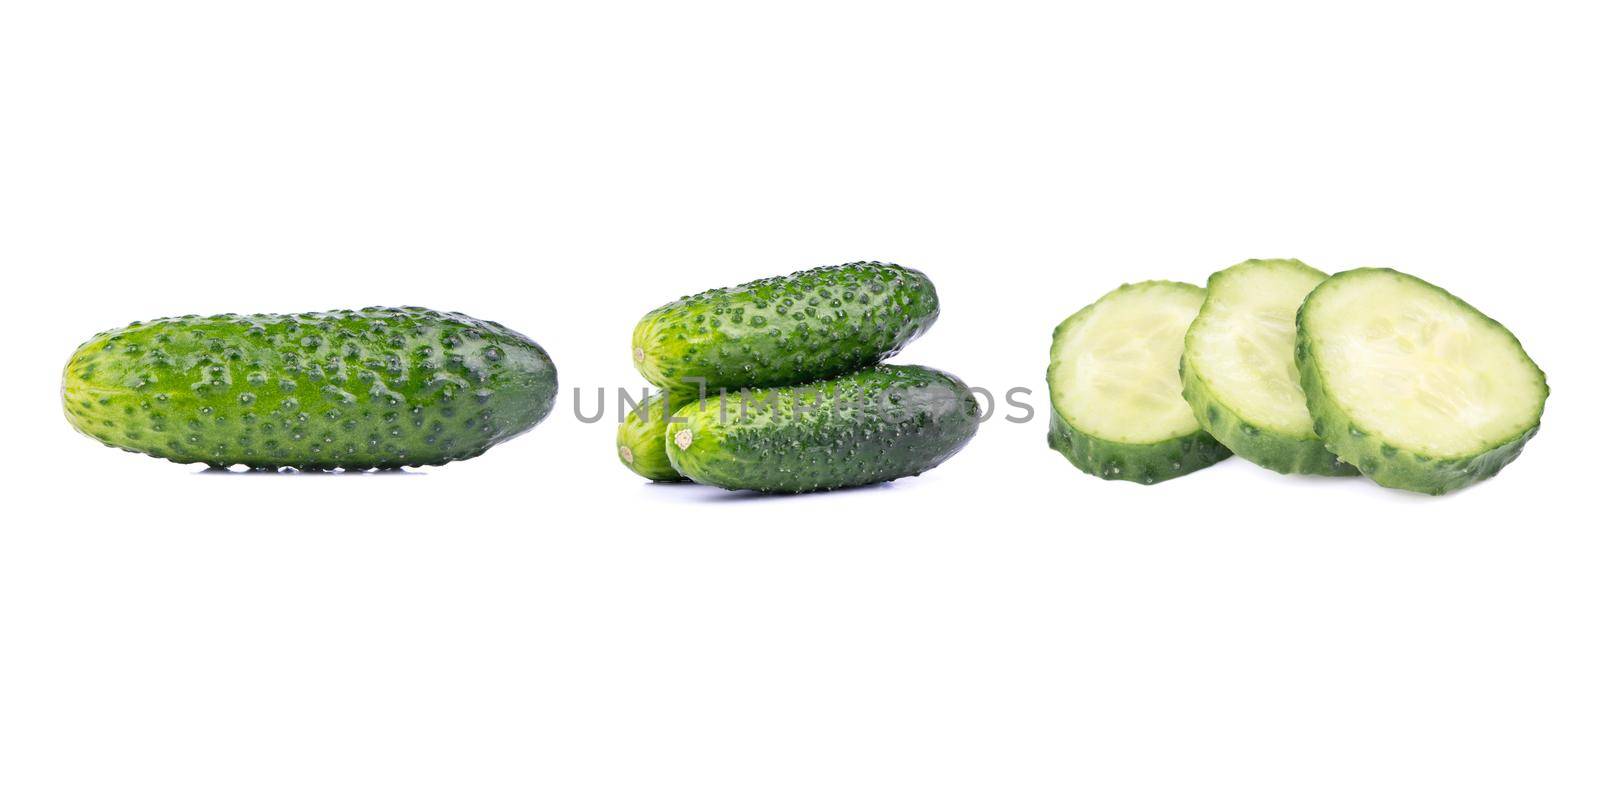 Cucumber collection isolated on a white background.